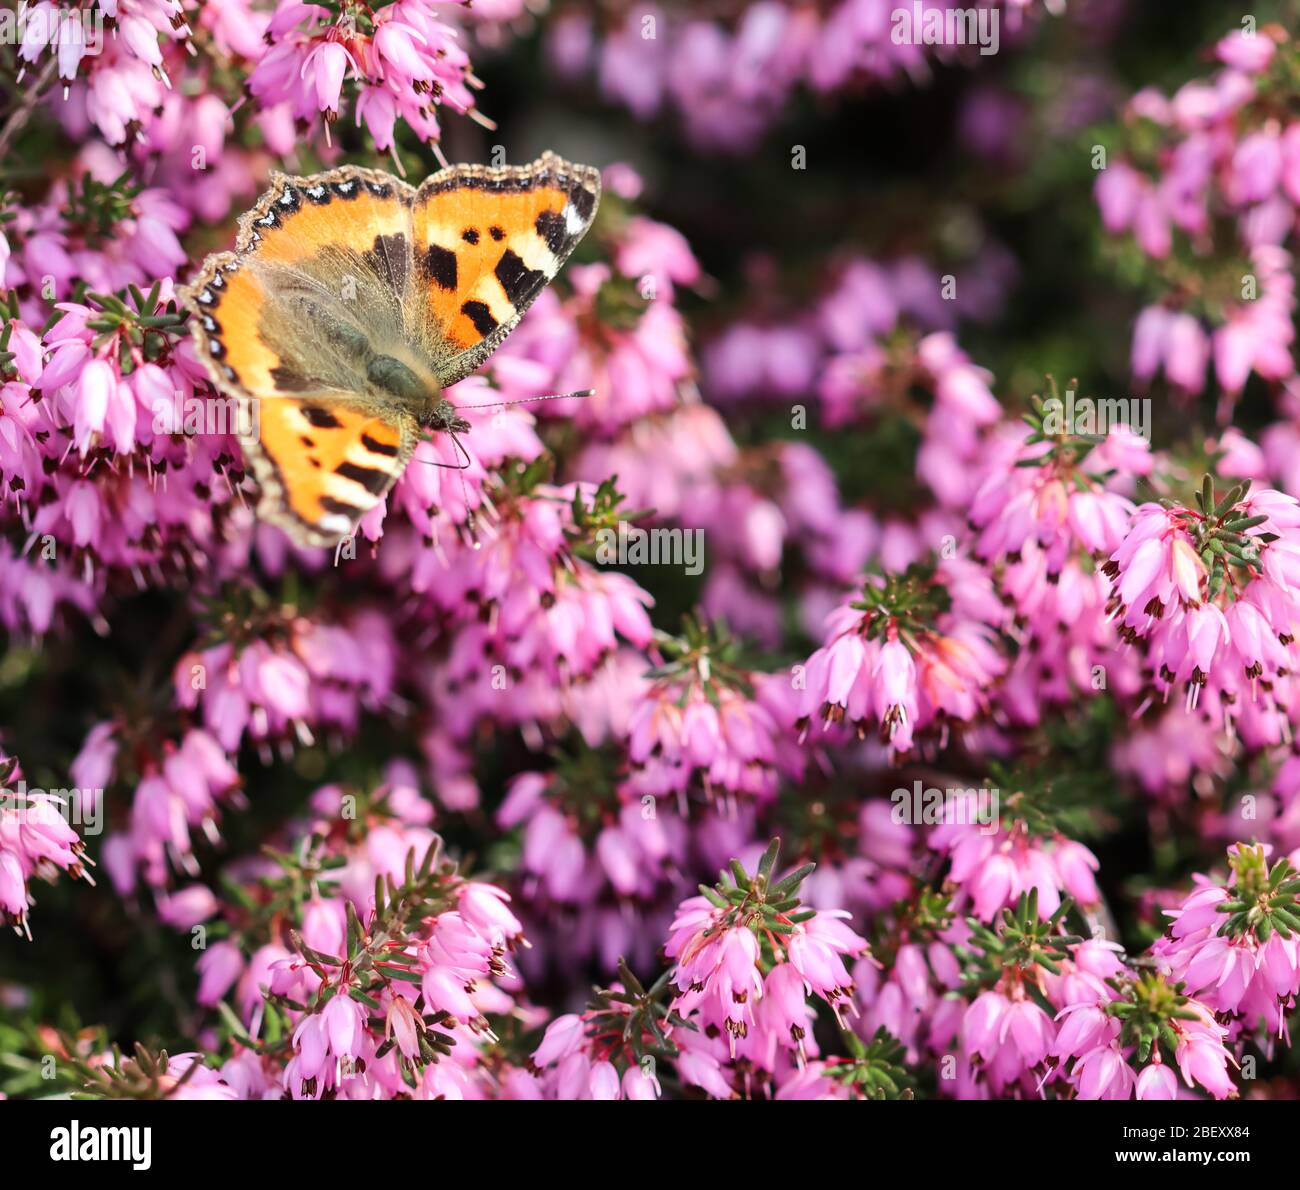 Pink Erica Carnea flowers (Winter Hit) and a butterfly in a spring garden. Stock Photo